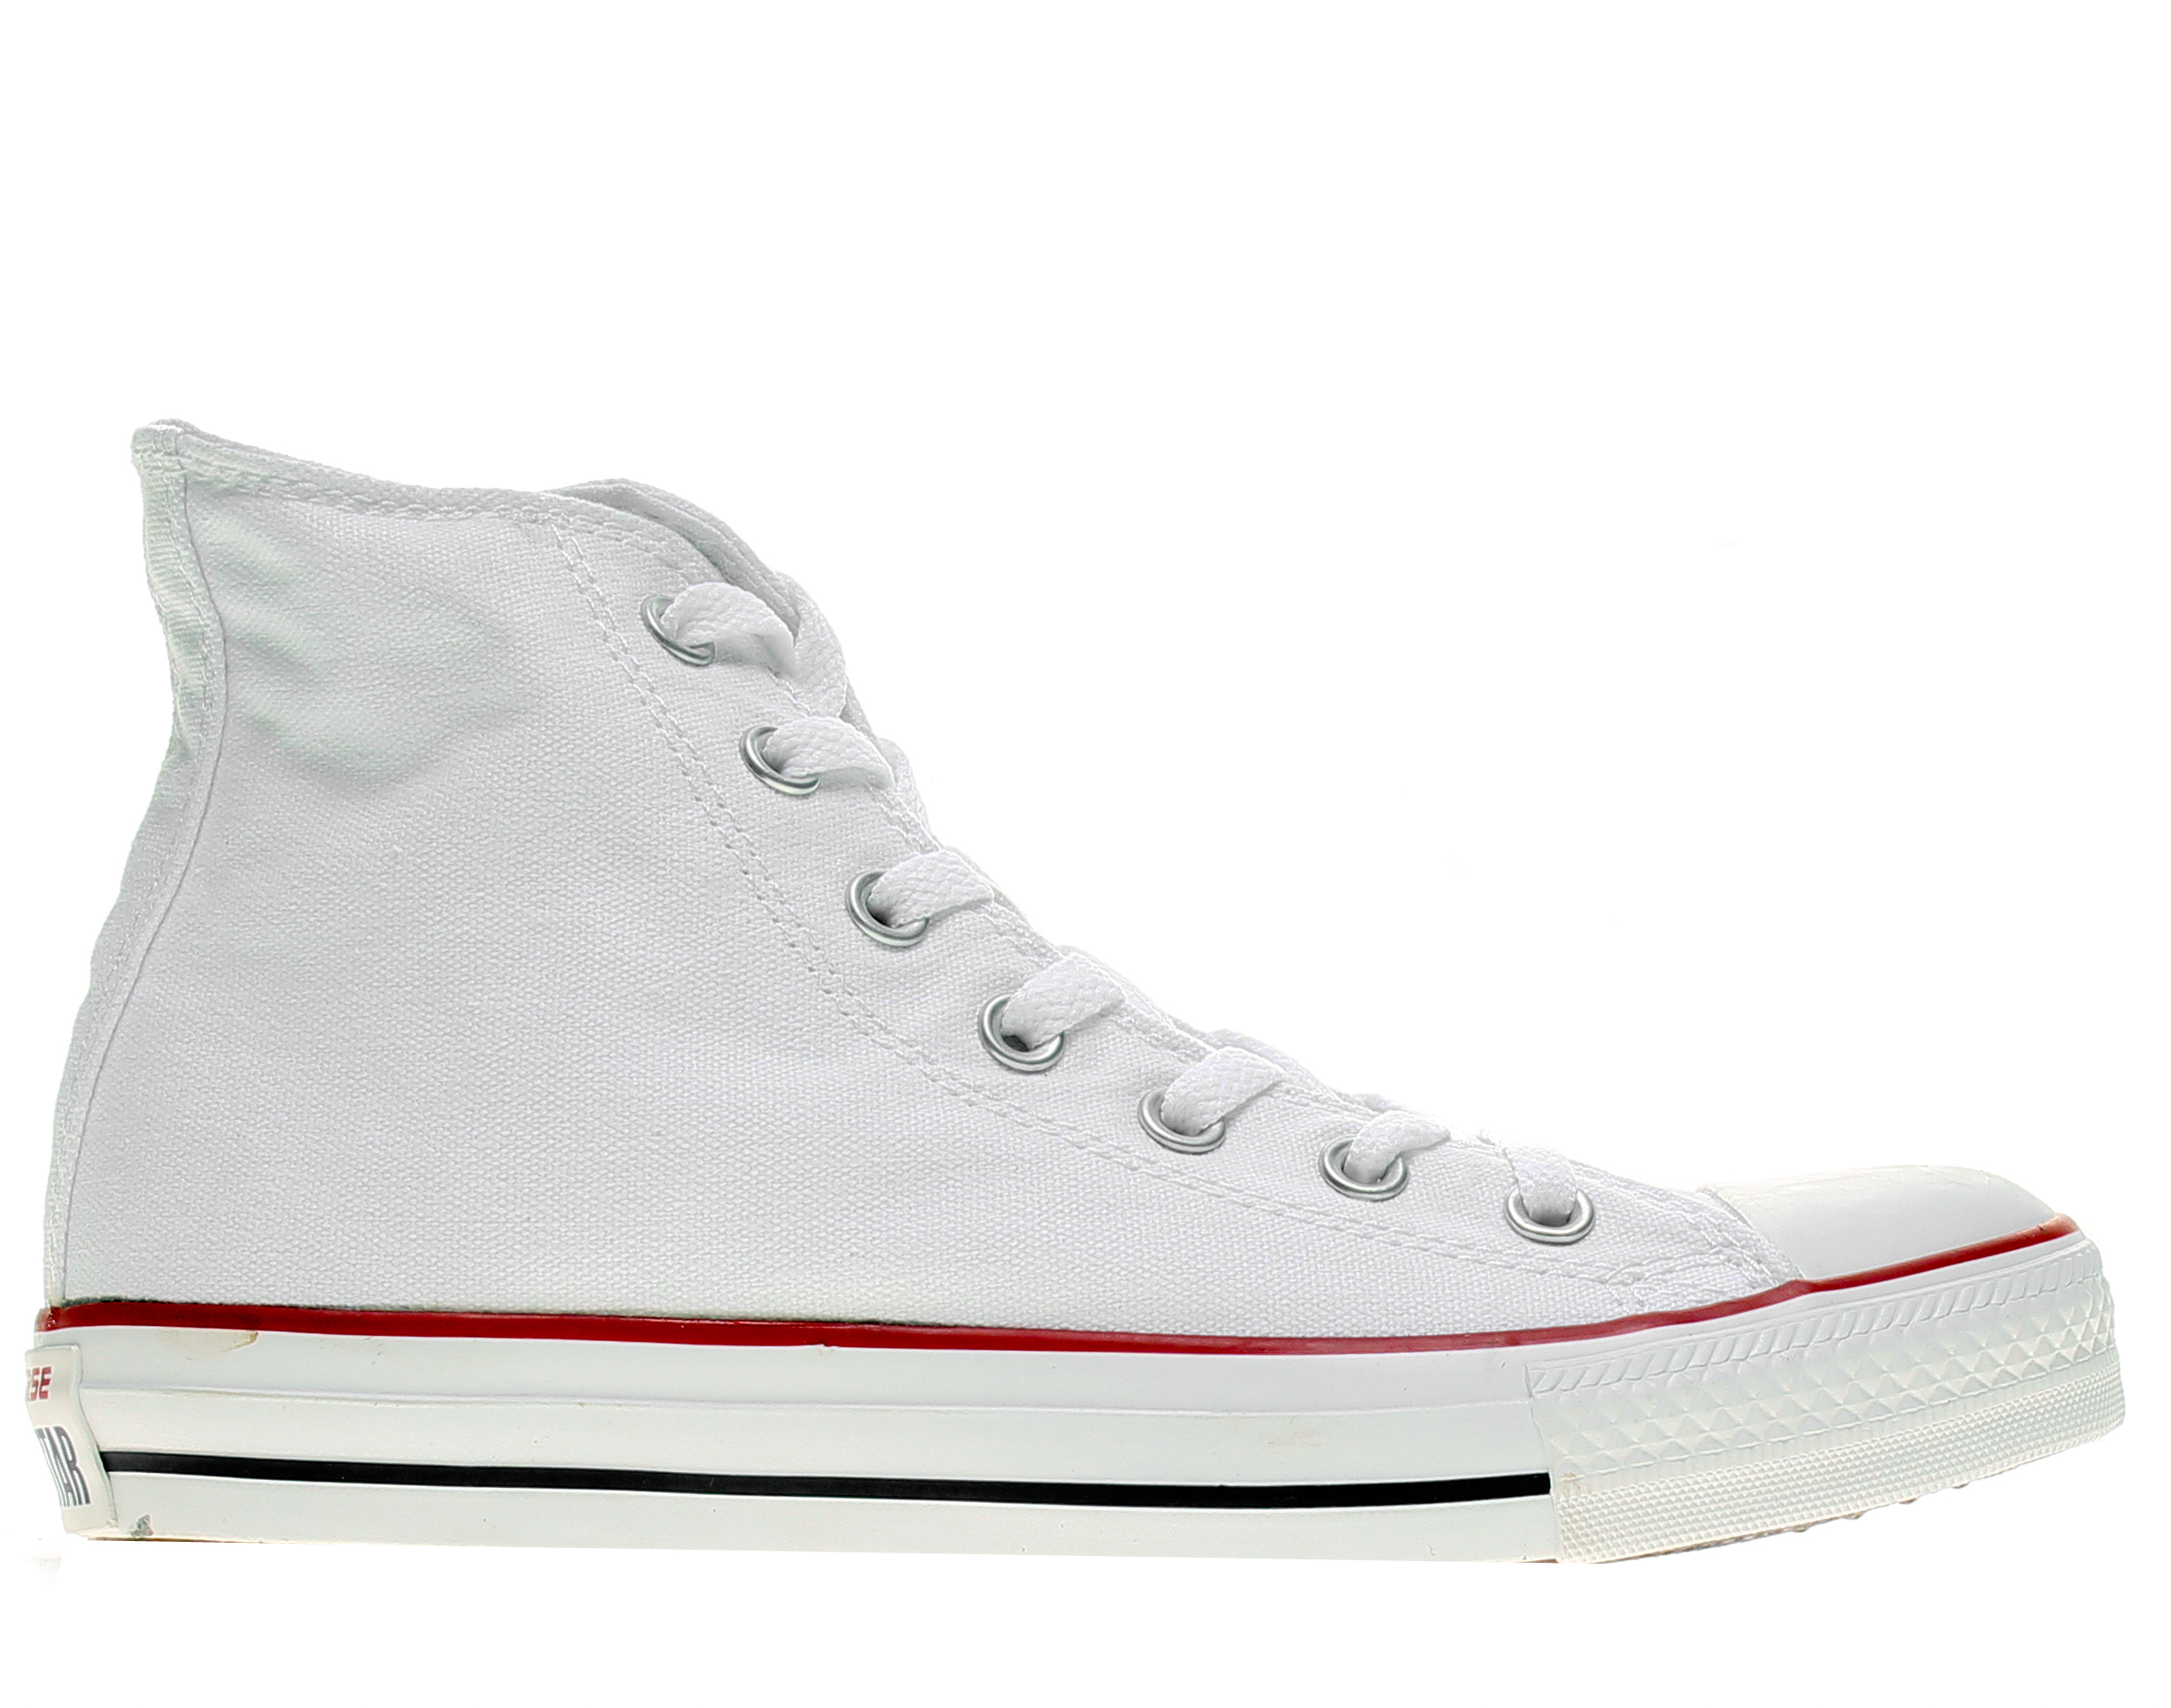 Converse Chuck Taylor All Star Hi Sneakers White - image 2 of 6